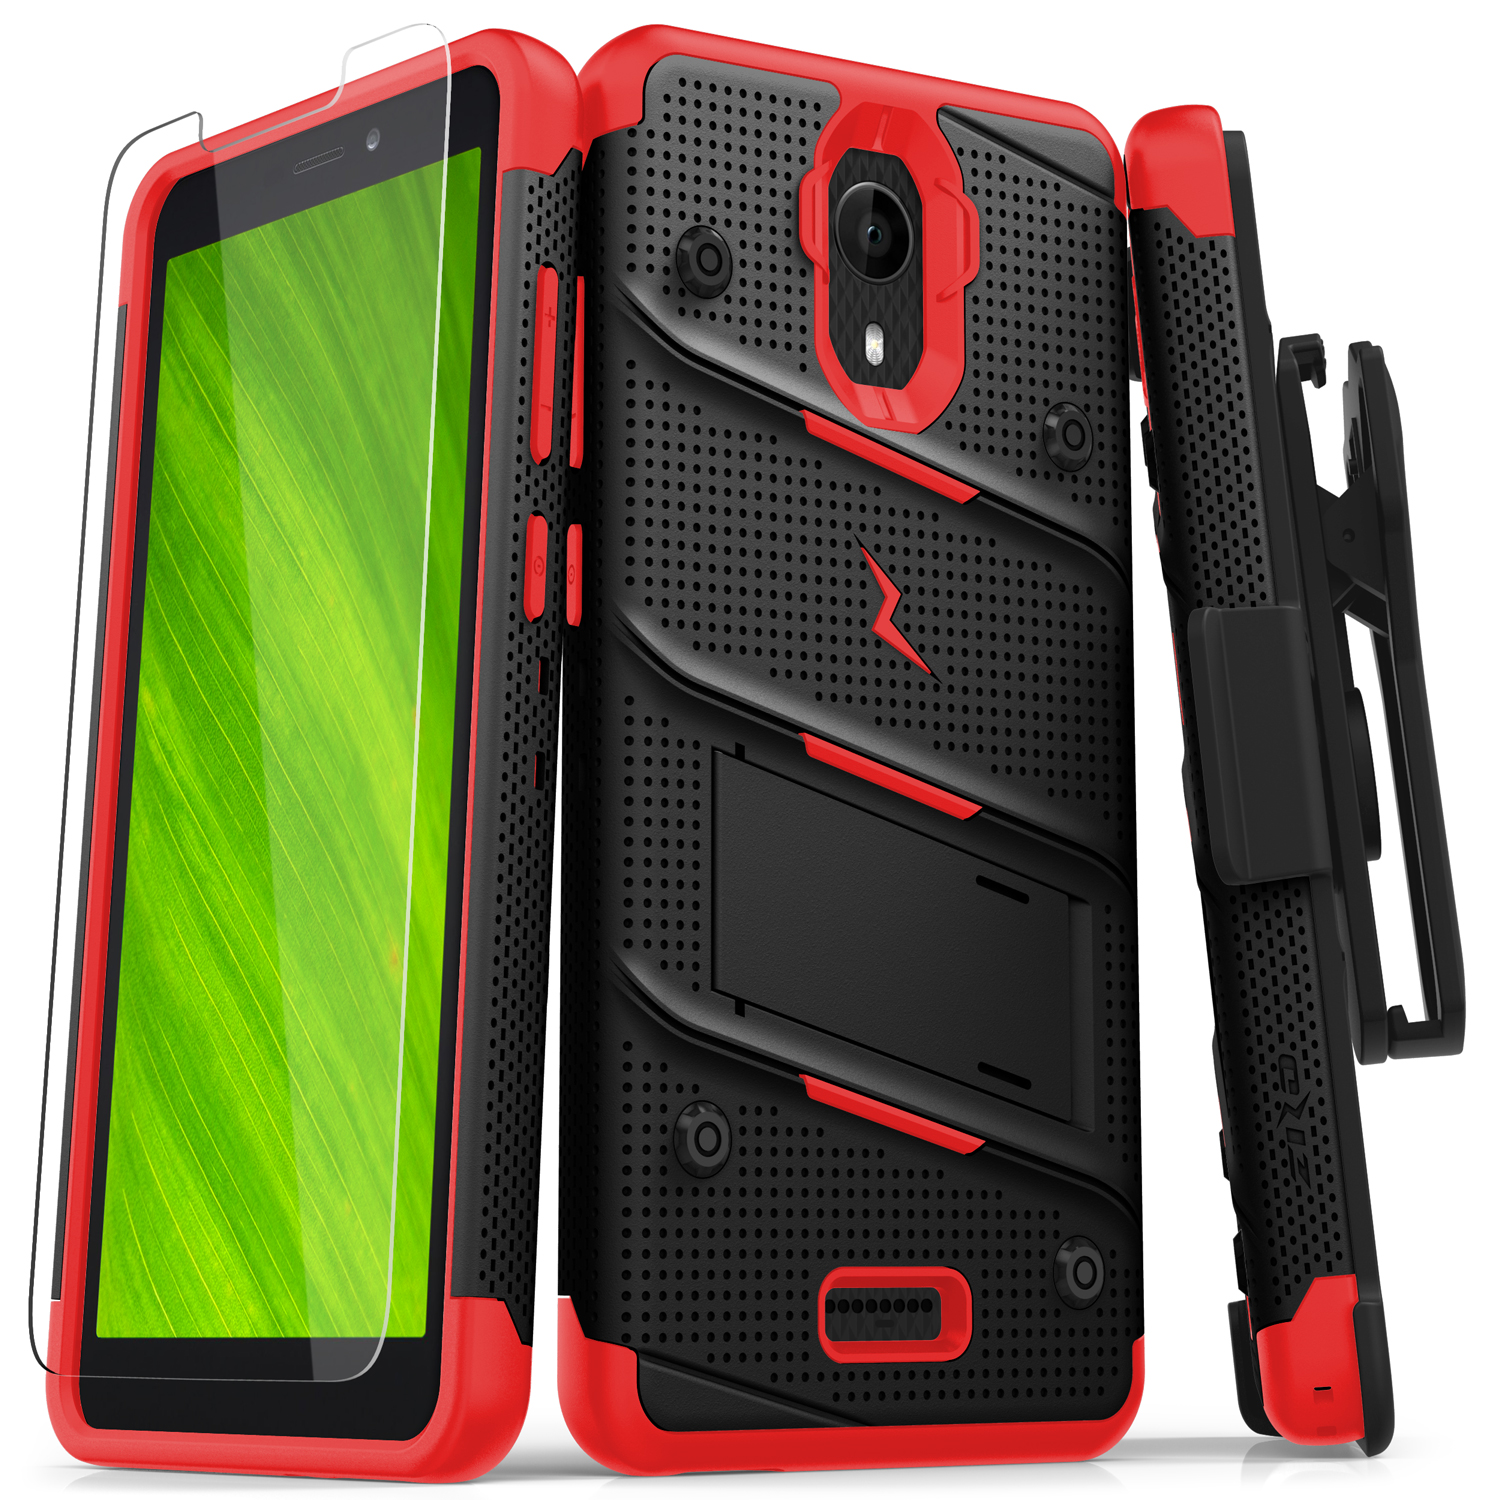 Cricket Icon Smartphone: Zizo BOLT Case with Tempered Glass- Black/Red (9584)